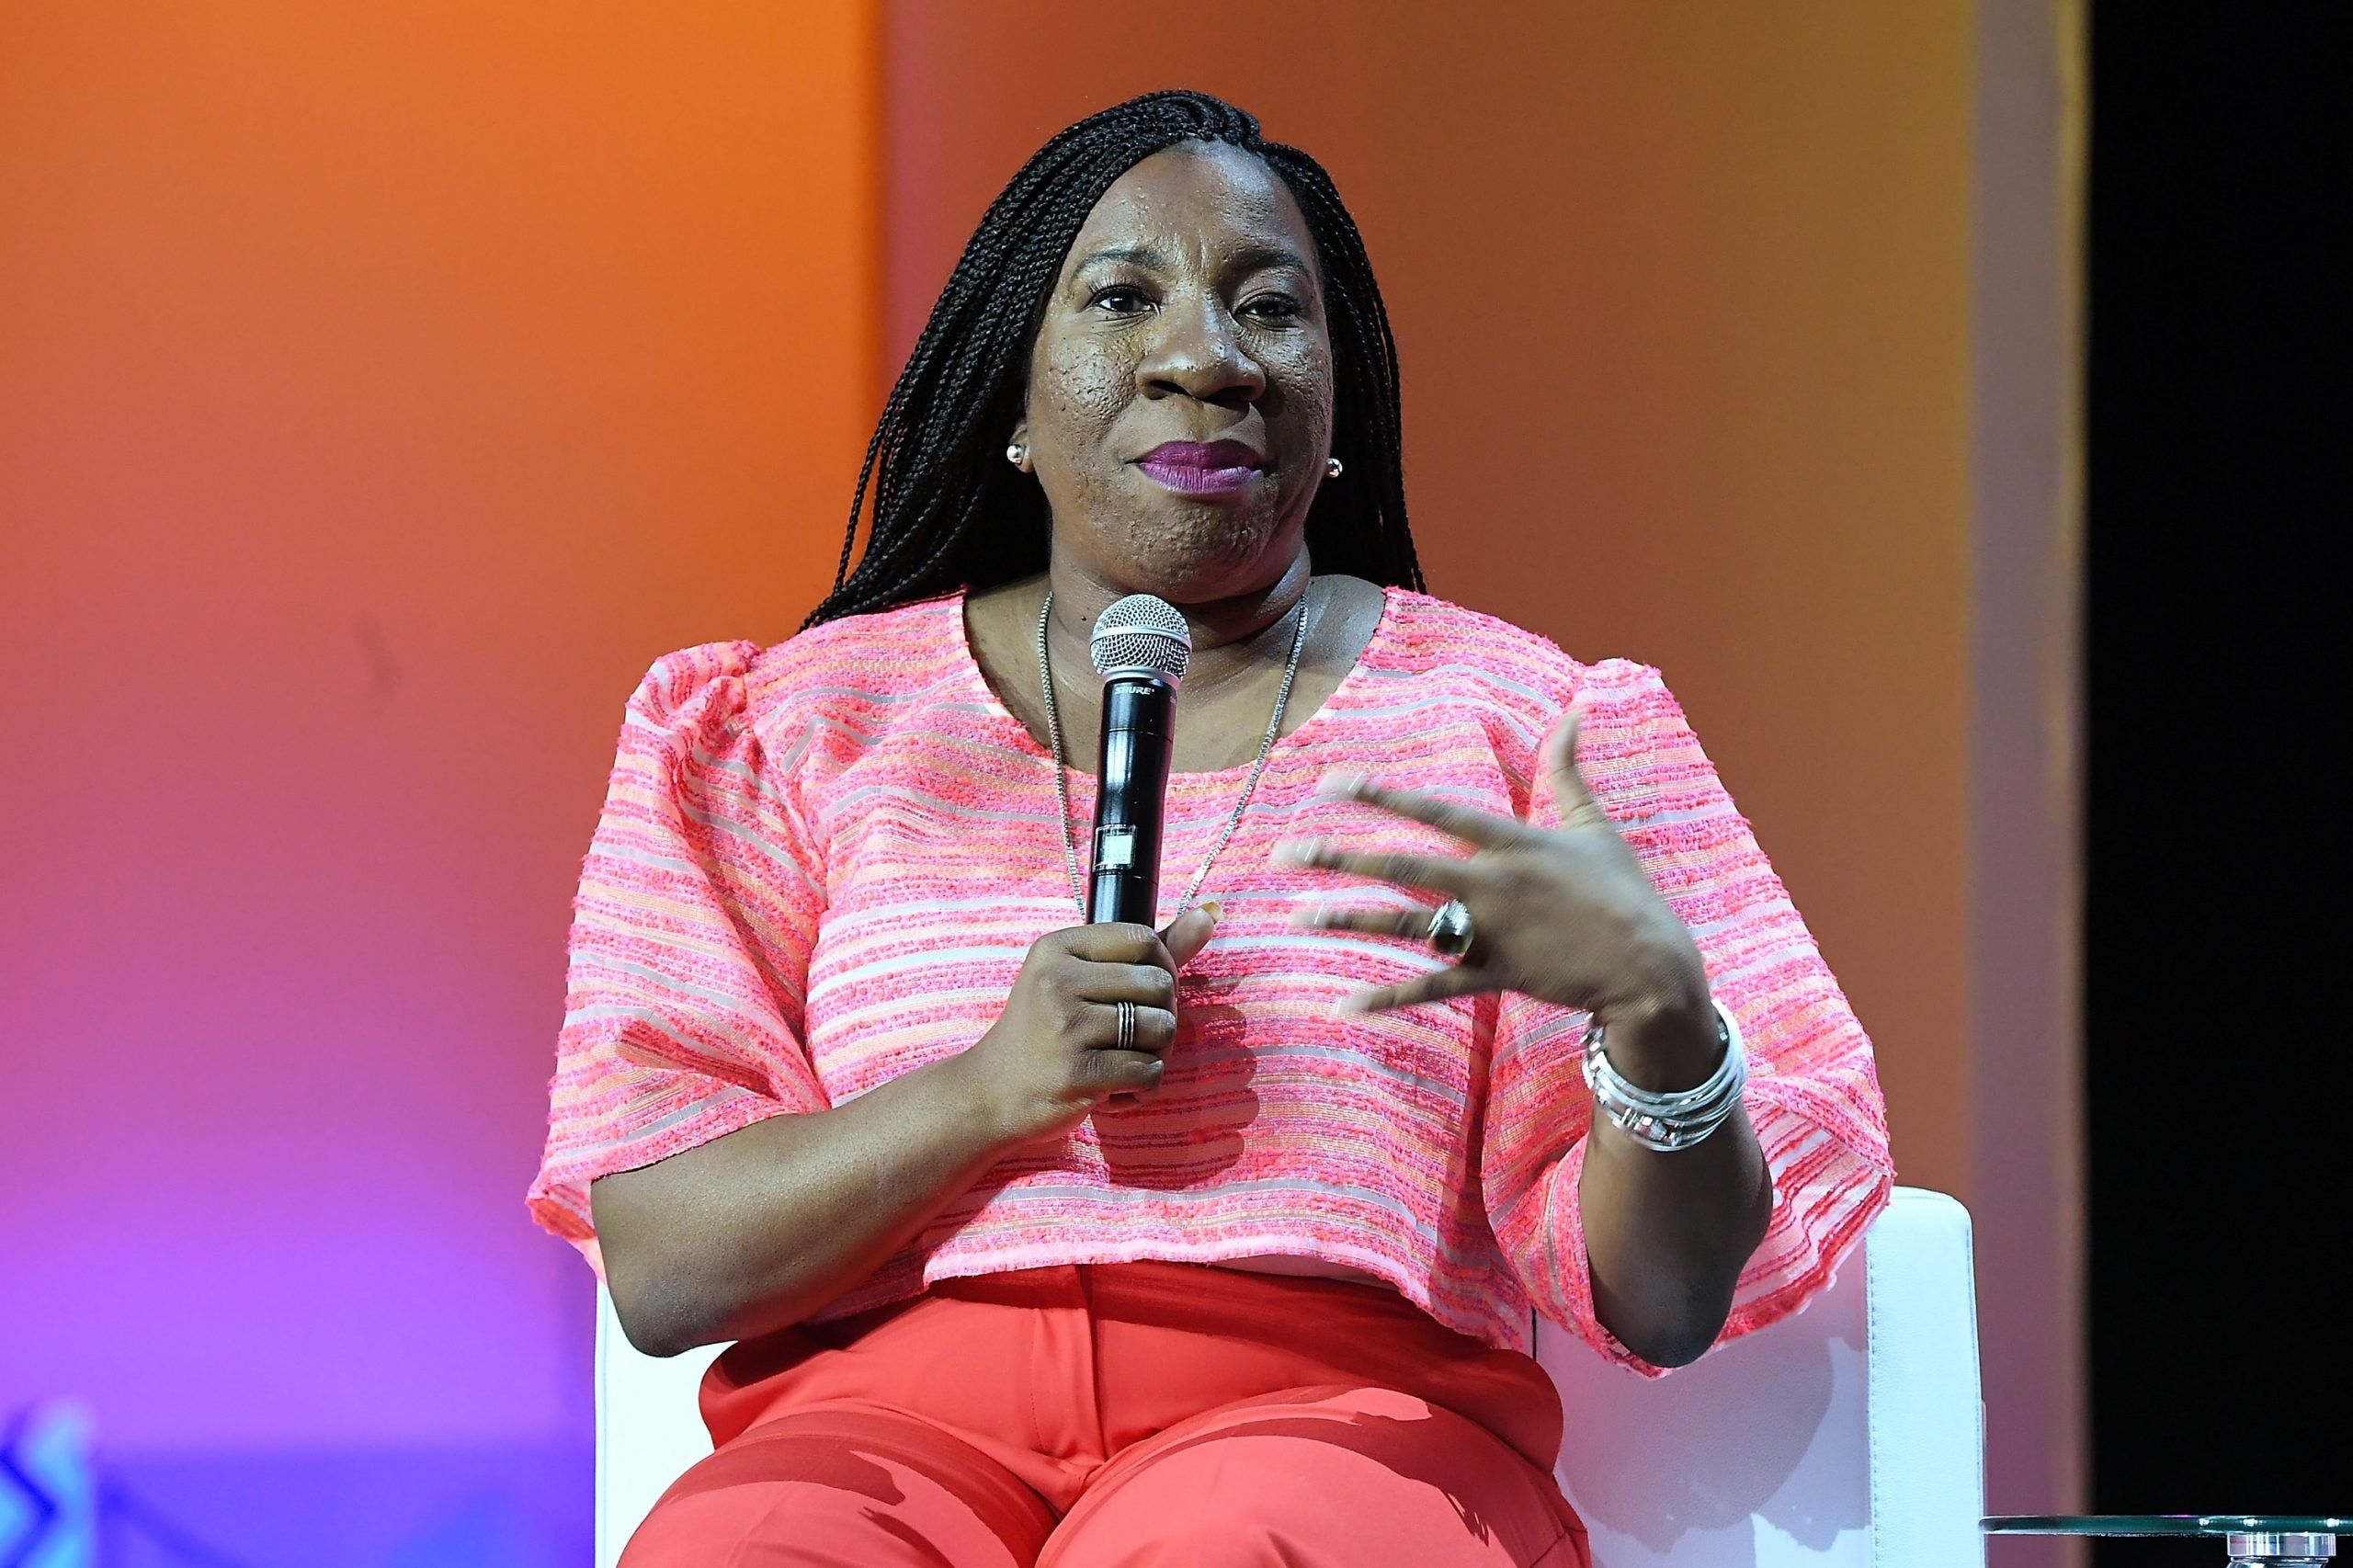 Me Too Founder Tarana Burke On What It's Like Caring For A Spouse With Coronavirus